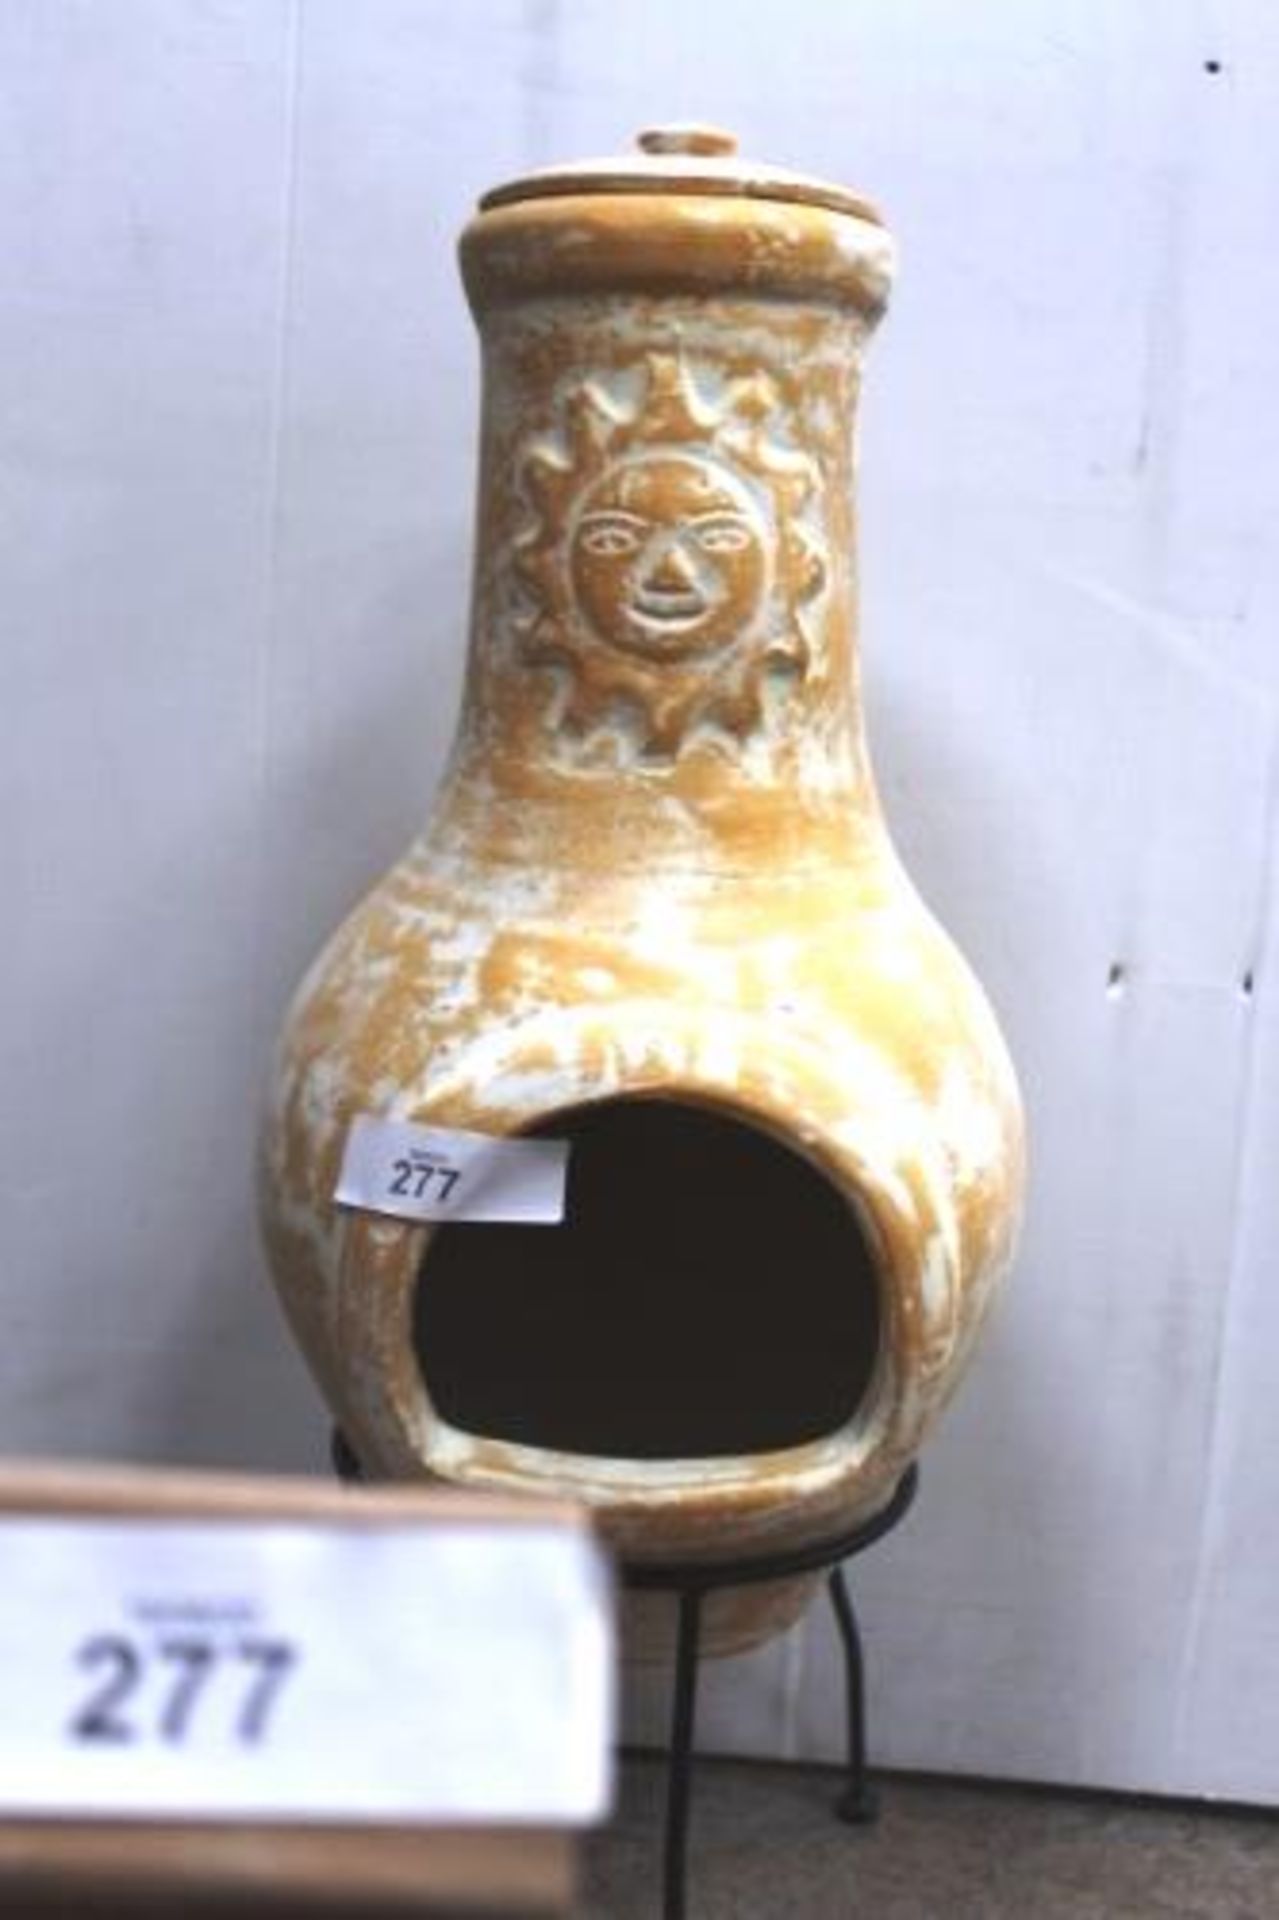 An El Fuego Lolosol 75 clay chimenea with sun decoration, with lid and stand - New (ES17) - Image 2 of 3